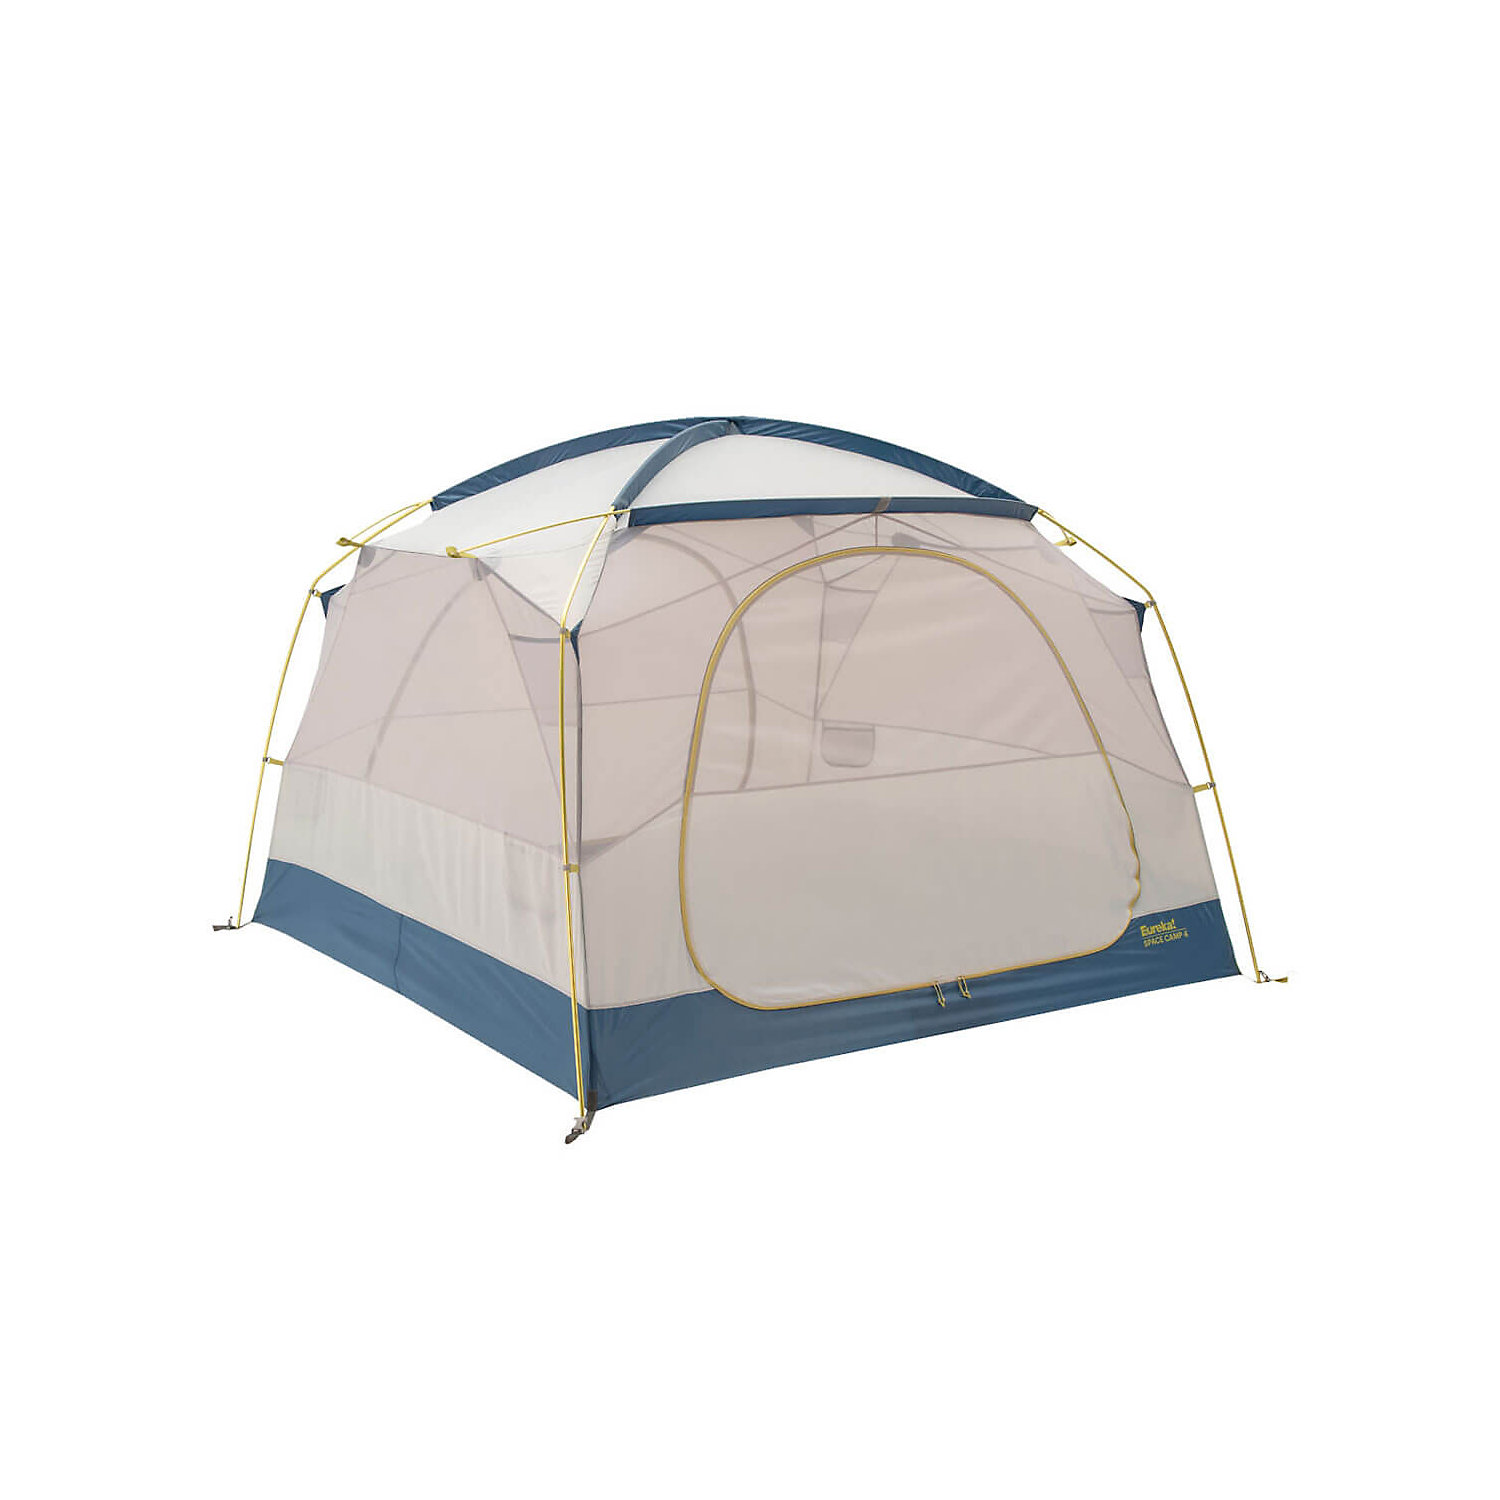 Moose Country Gear Base Camp Person 4-Season Expedition-Quality  Backpacking Tent by Moose Racing並行輸入